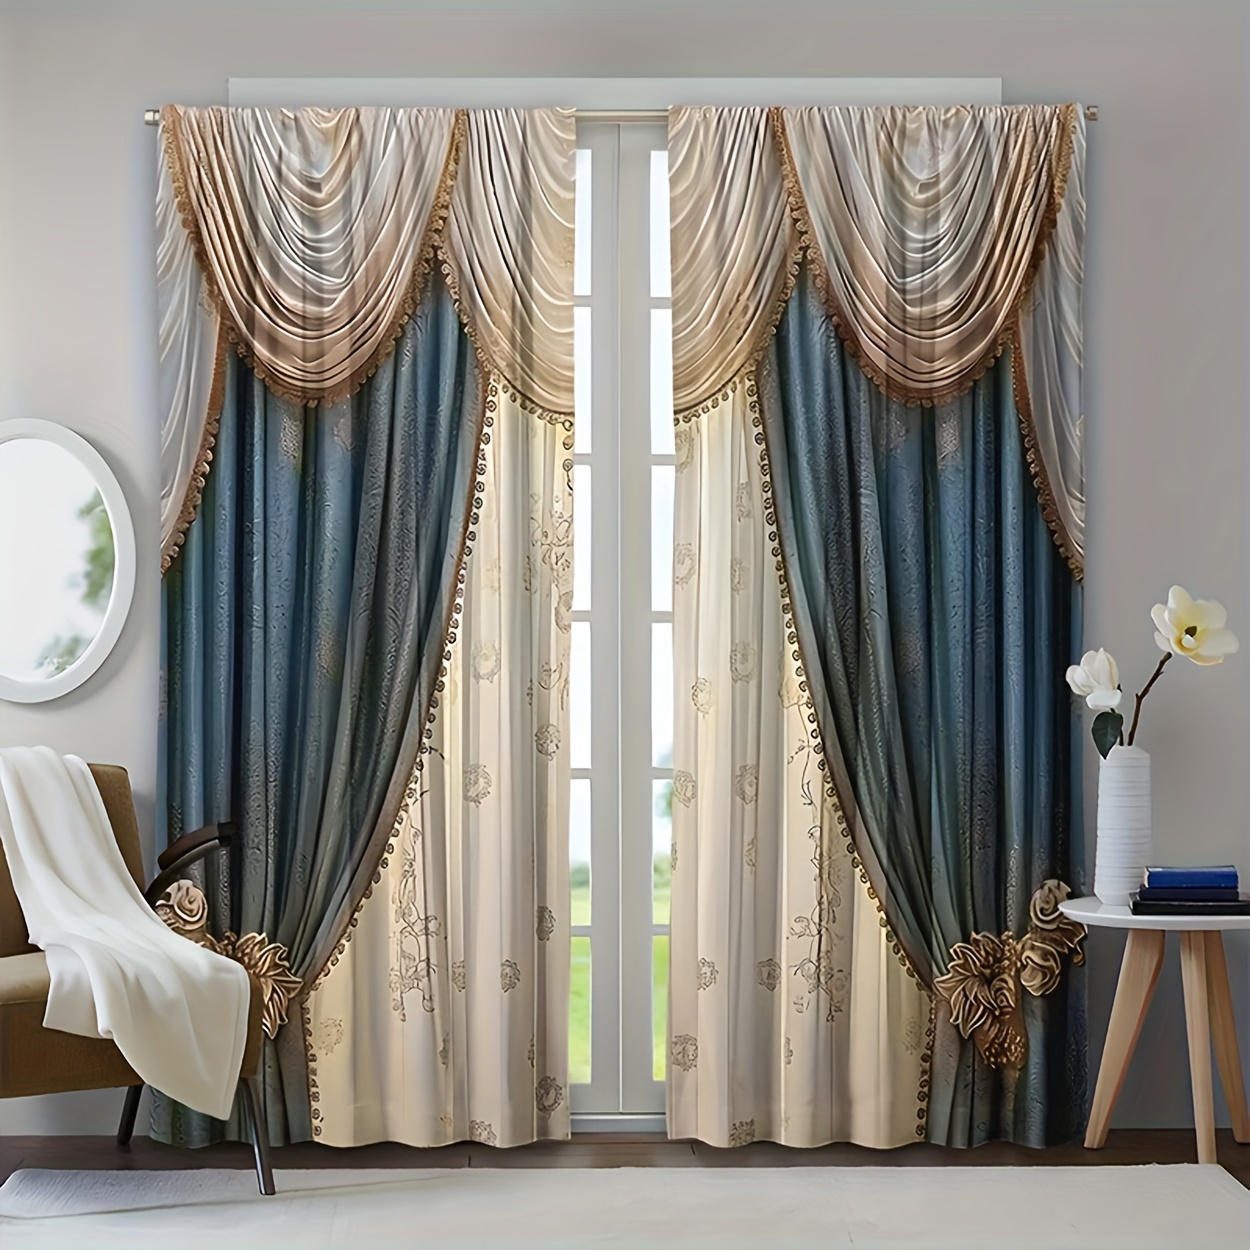 

2pcs Vintage Printed Light Filtering Curtains, Rod Pocket Processing Suitable For Living Room Bedroom Study Home Decoration Curtains